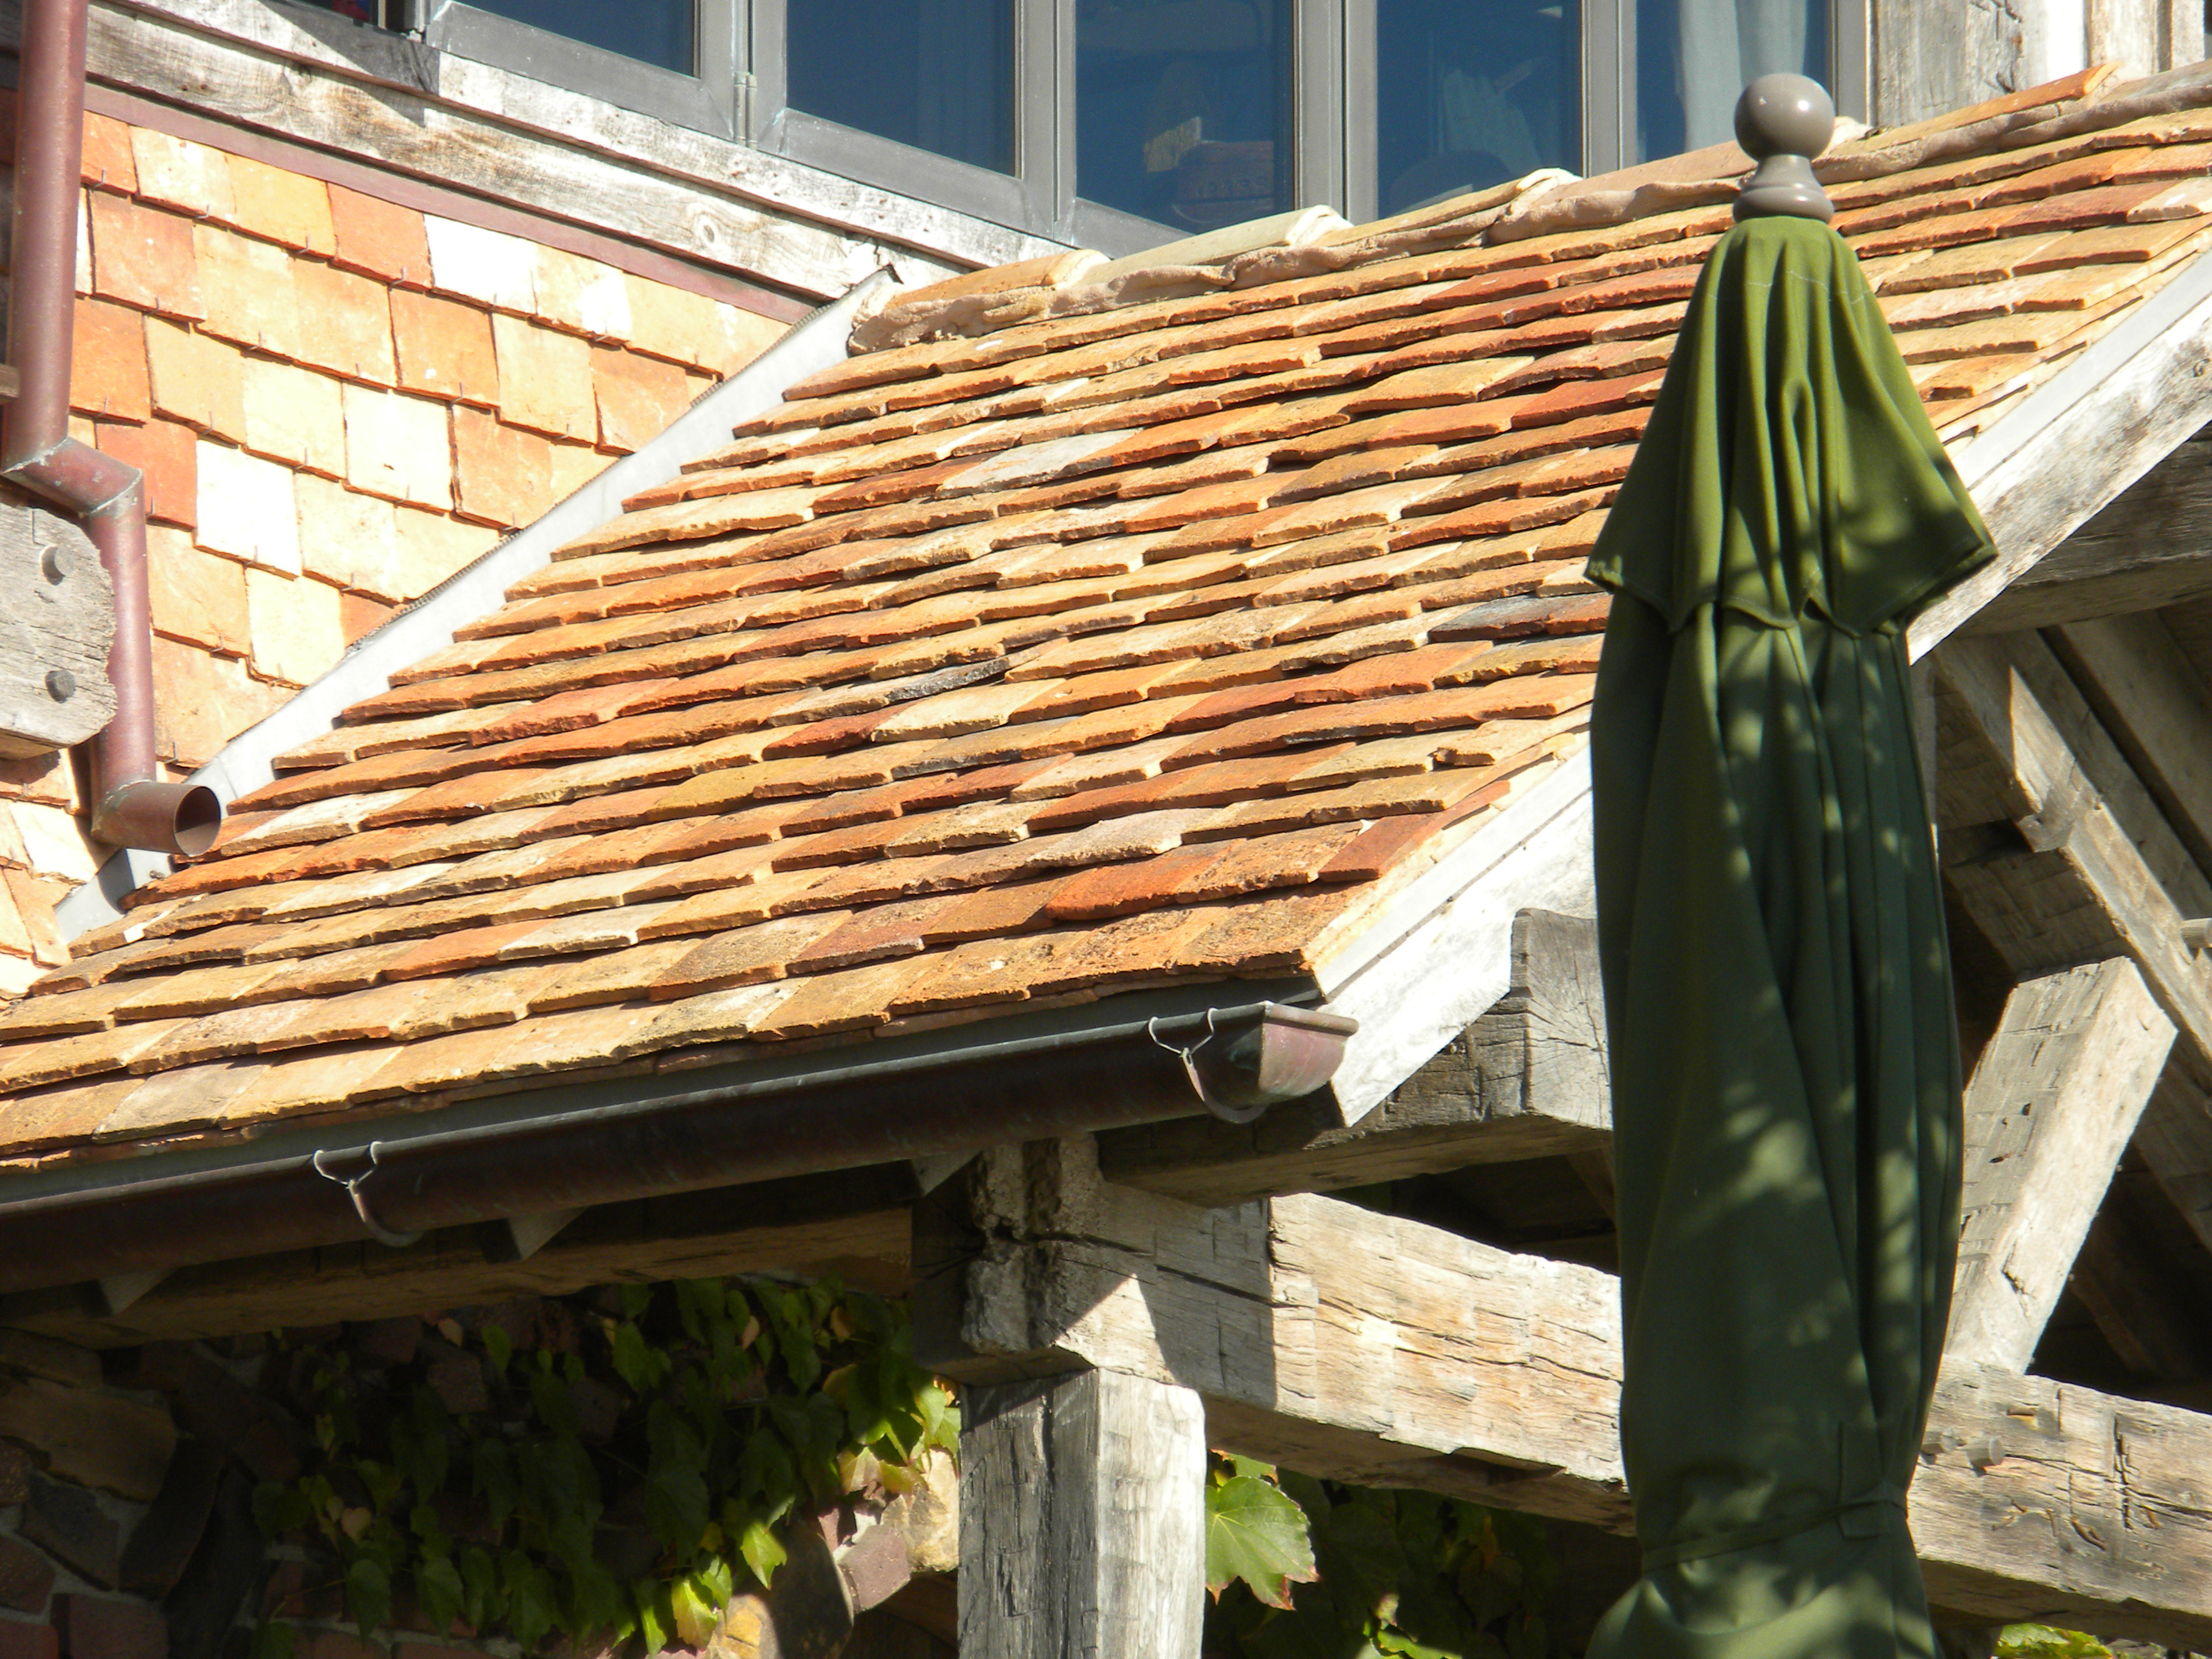 Details about   Reclaimed Handmade Roof Tiles 